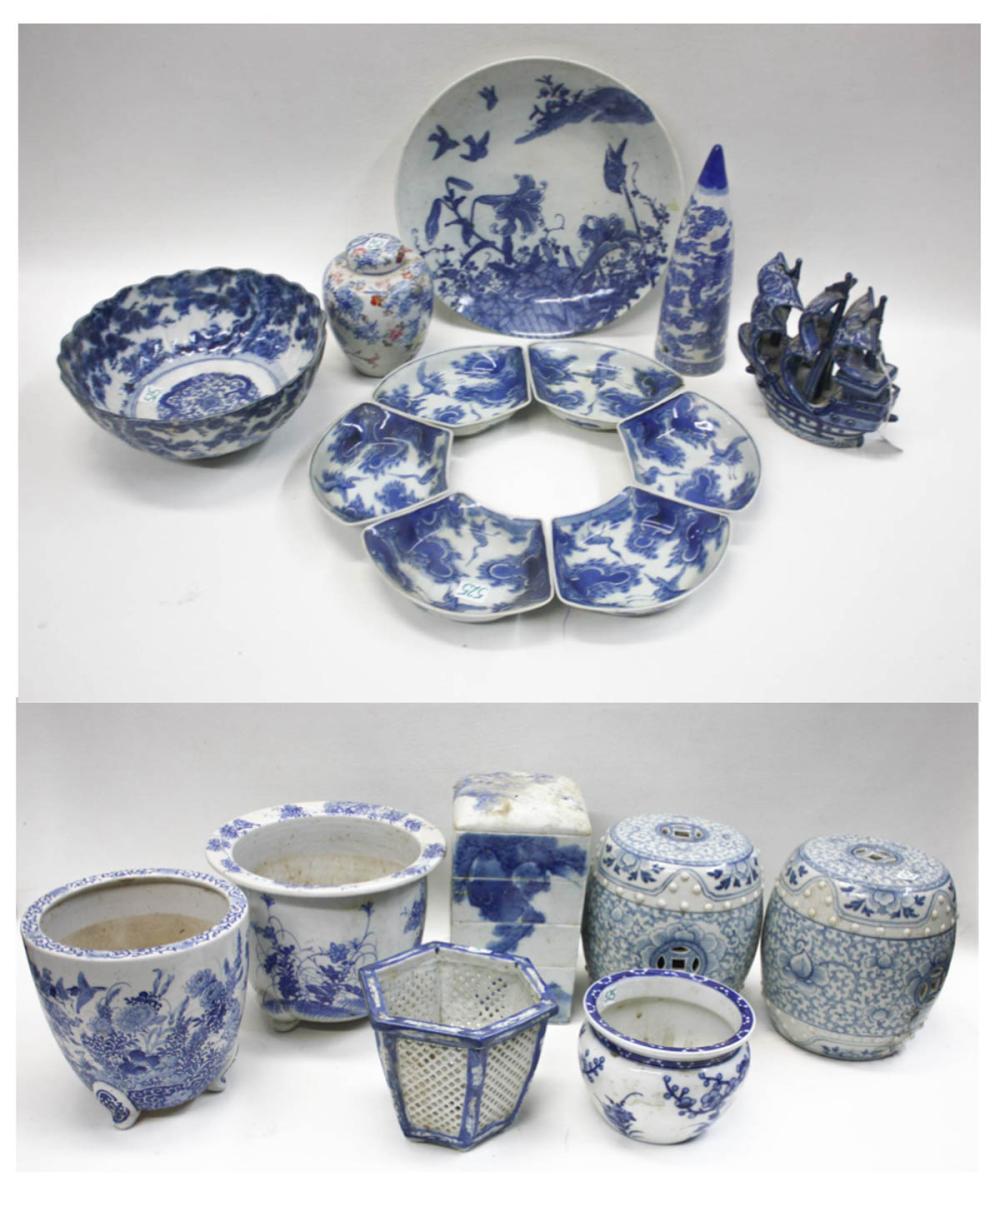 COLLECTION OF BLUE AND WHITE PORCELAIN